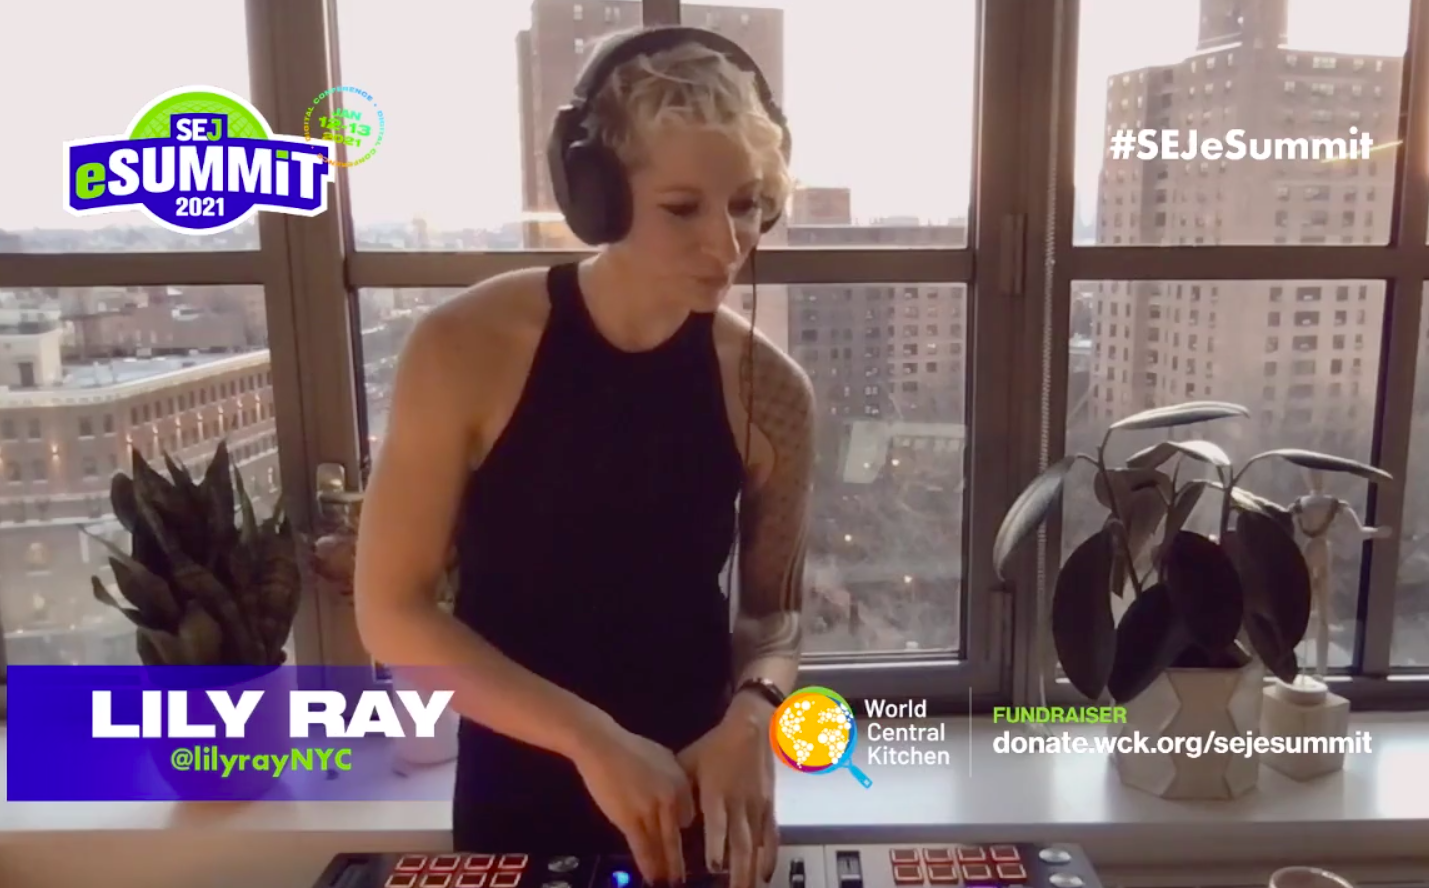 SEO Pro/DJ and digital marketing expert Lily Ray shared her beautiful NYC views and exceptional deep house tunes with attendees for the after-party